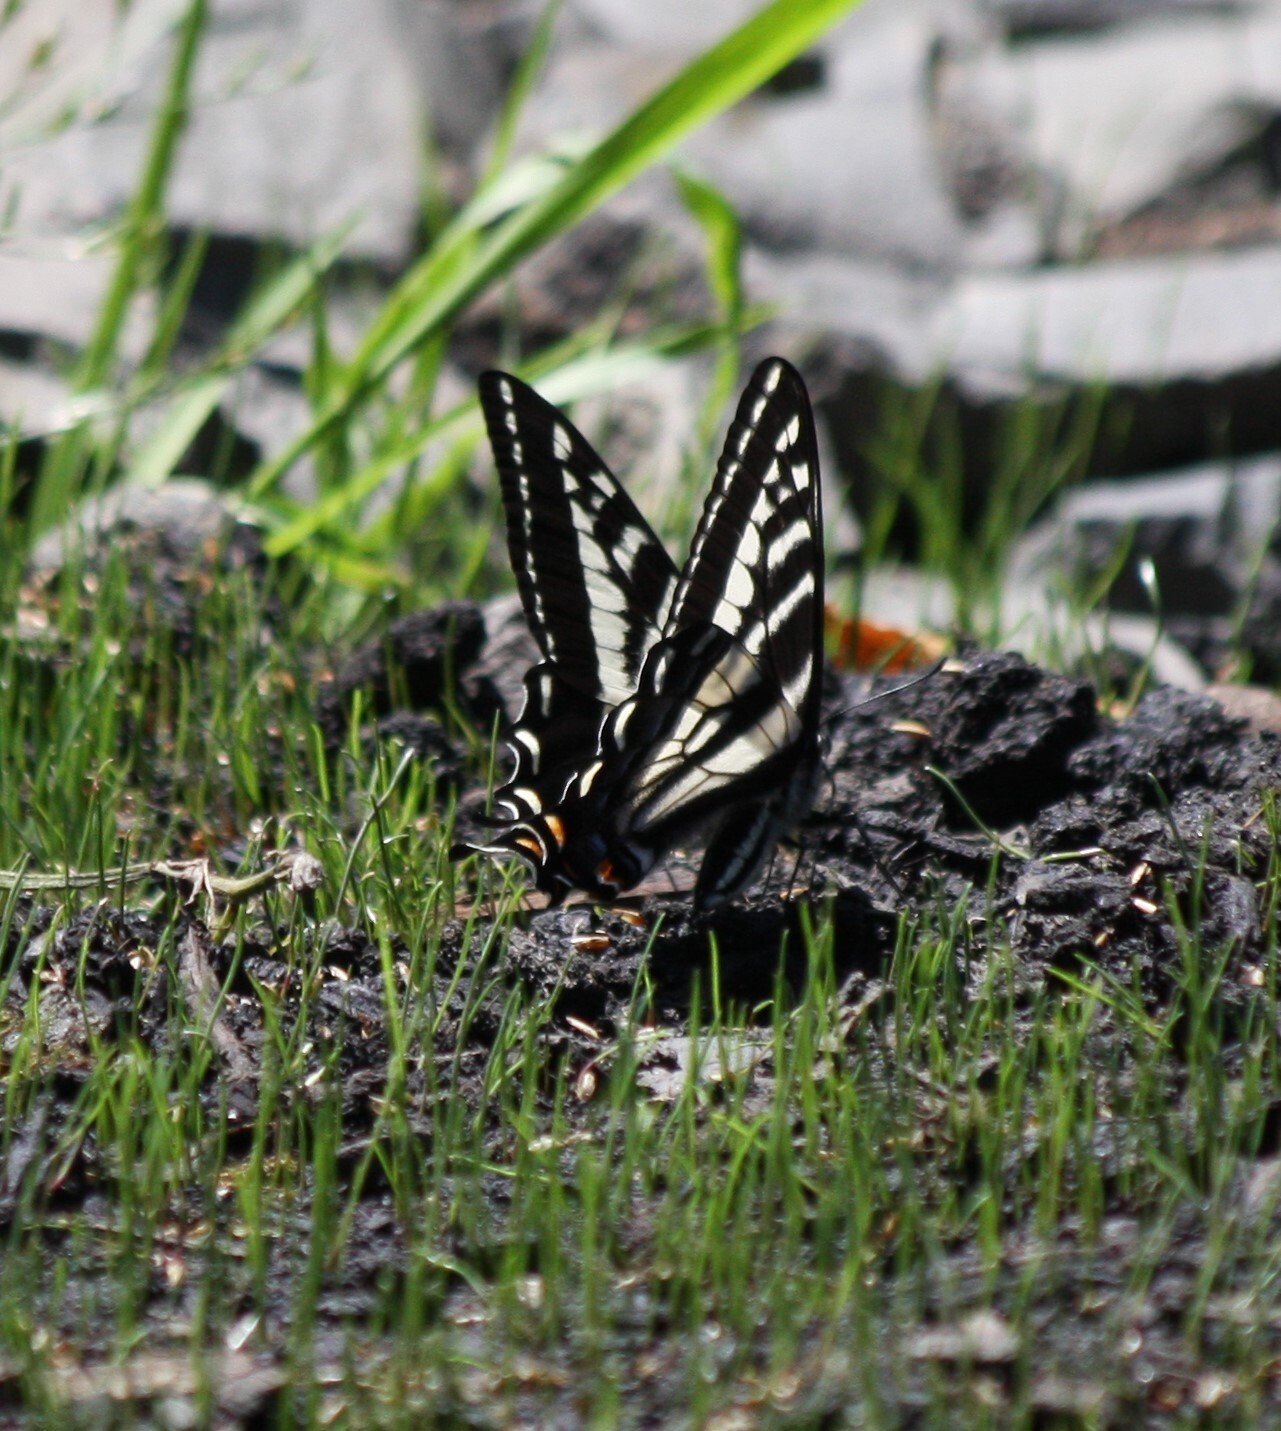 Chronicle staffer Sarah Burdick captured these photographs of swallowtail butterflies at her property south of Chehalis on Sunday morning. To submit photographs for potential publication in The Chronicle, email them to news@chronline.com. Be sure to include details like where the photograph was captured and when.